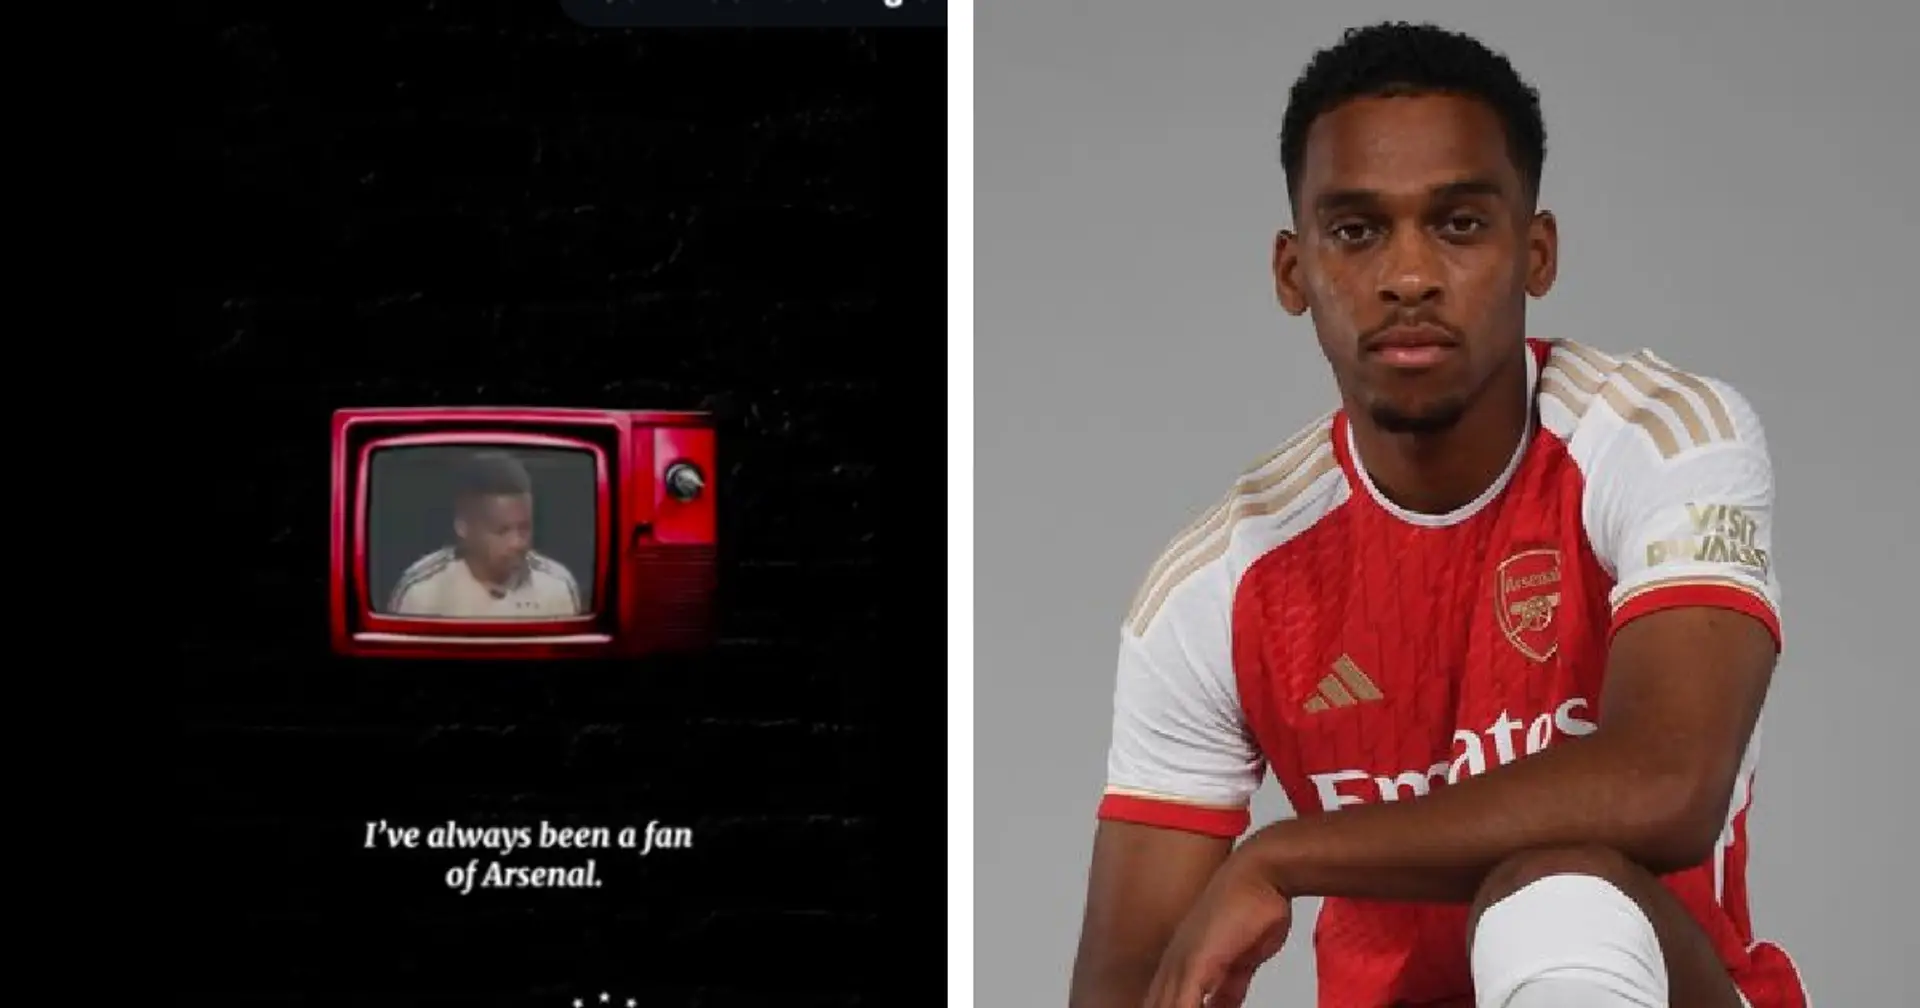 Ajax bids emotional farewell to Timber with throwback video & 2 more under-radar Arsenal stories